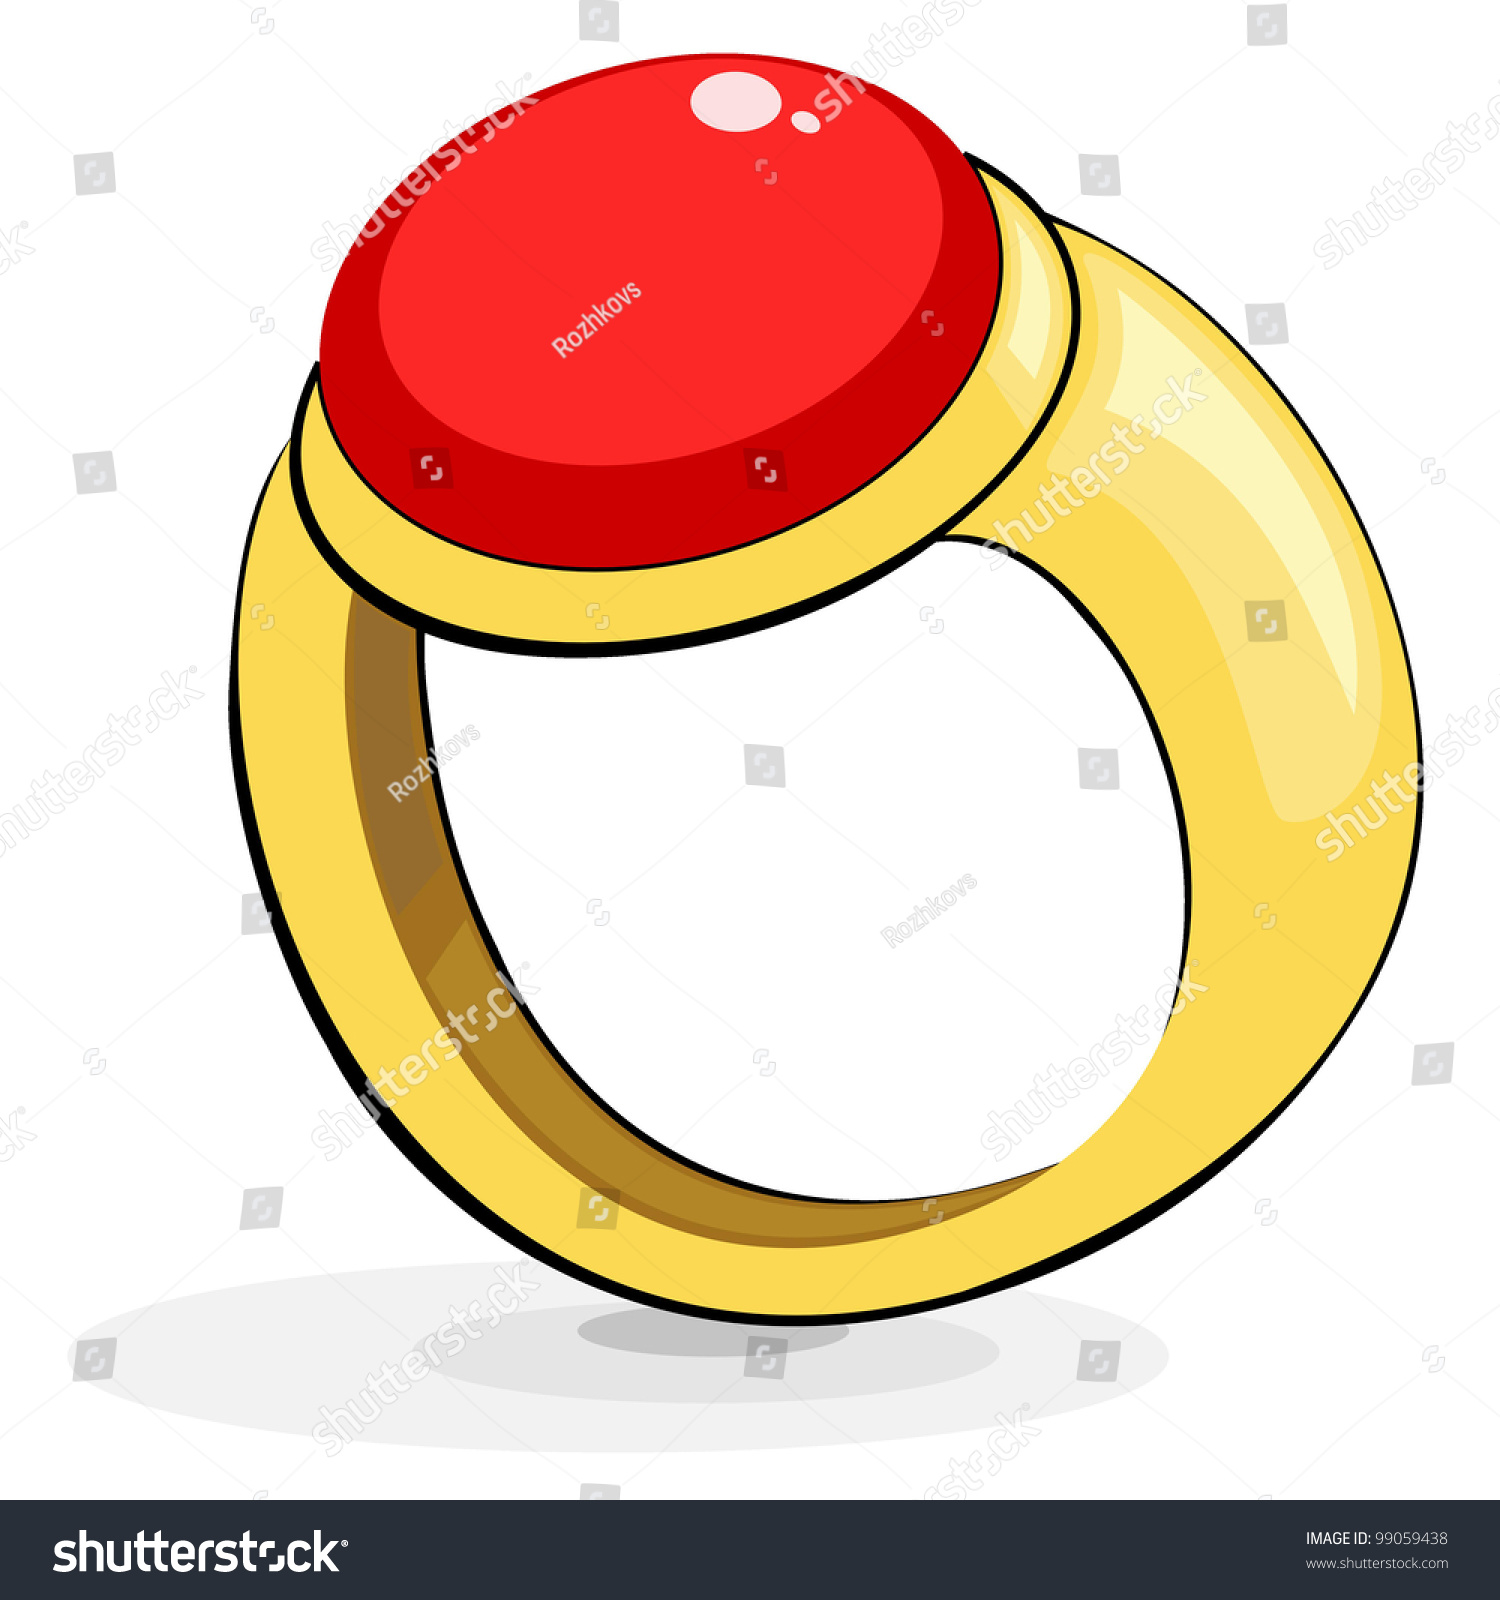 Gold Ring With A Ruby Stock Vector Illustration 99059438 : Shutterstock